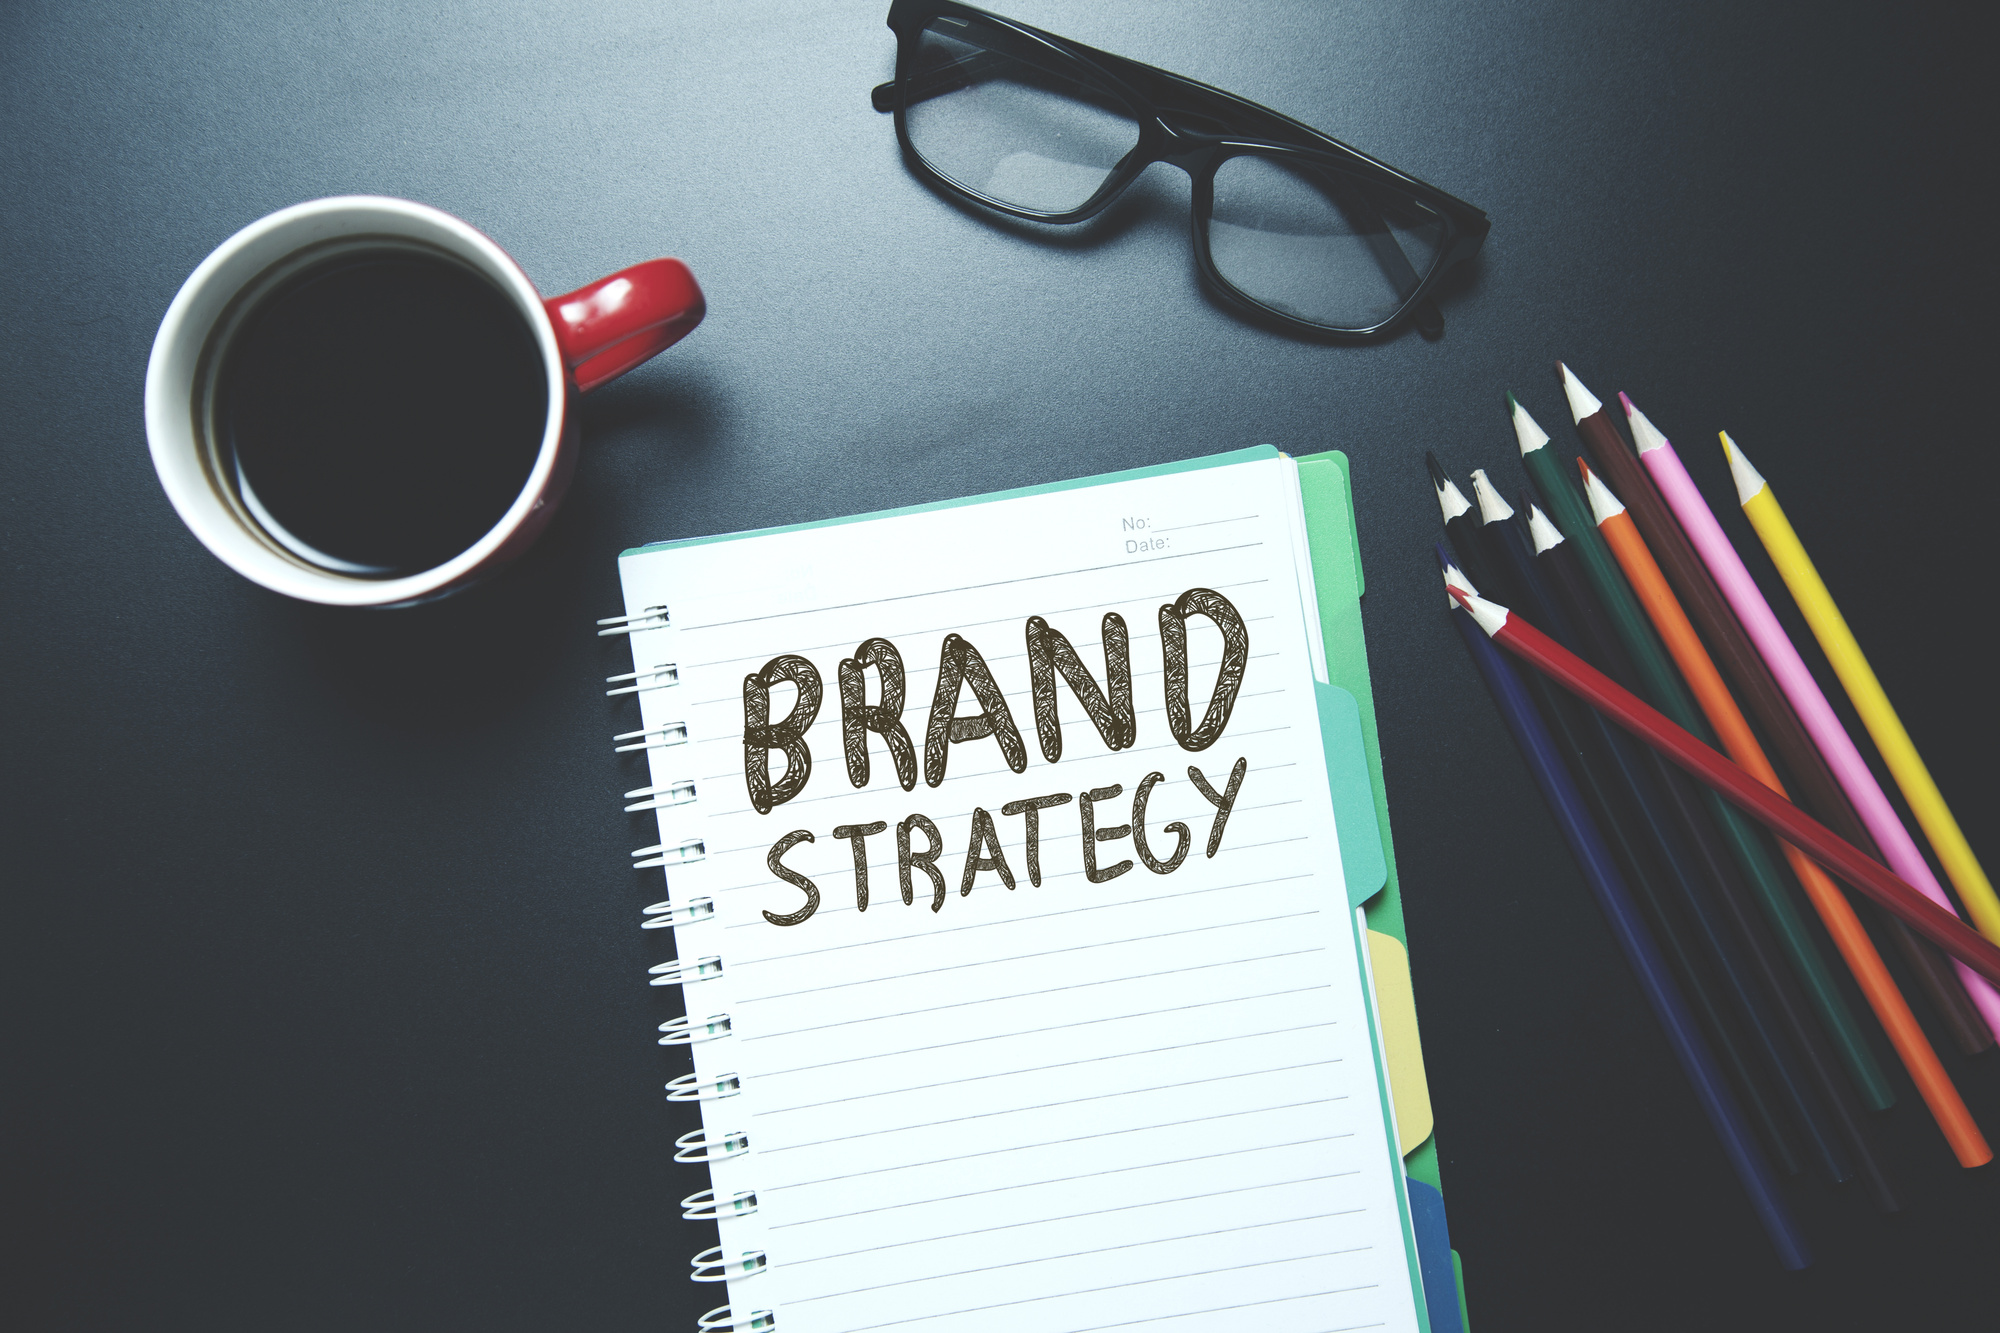 If your company does not have a strong brand, then it's time to develop one. This is what you need to know to build a brand for your business.